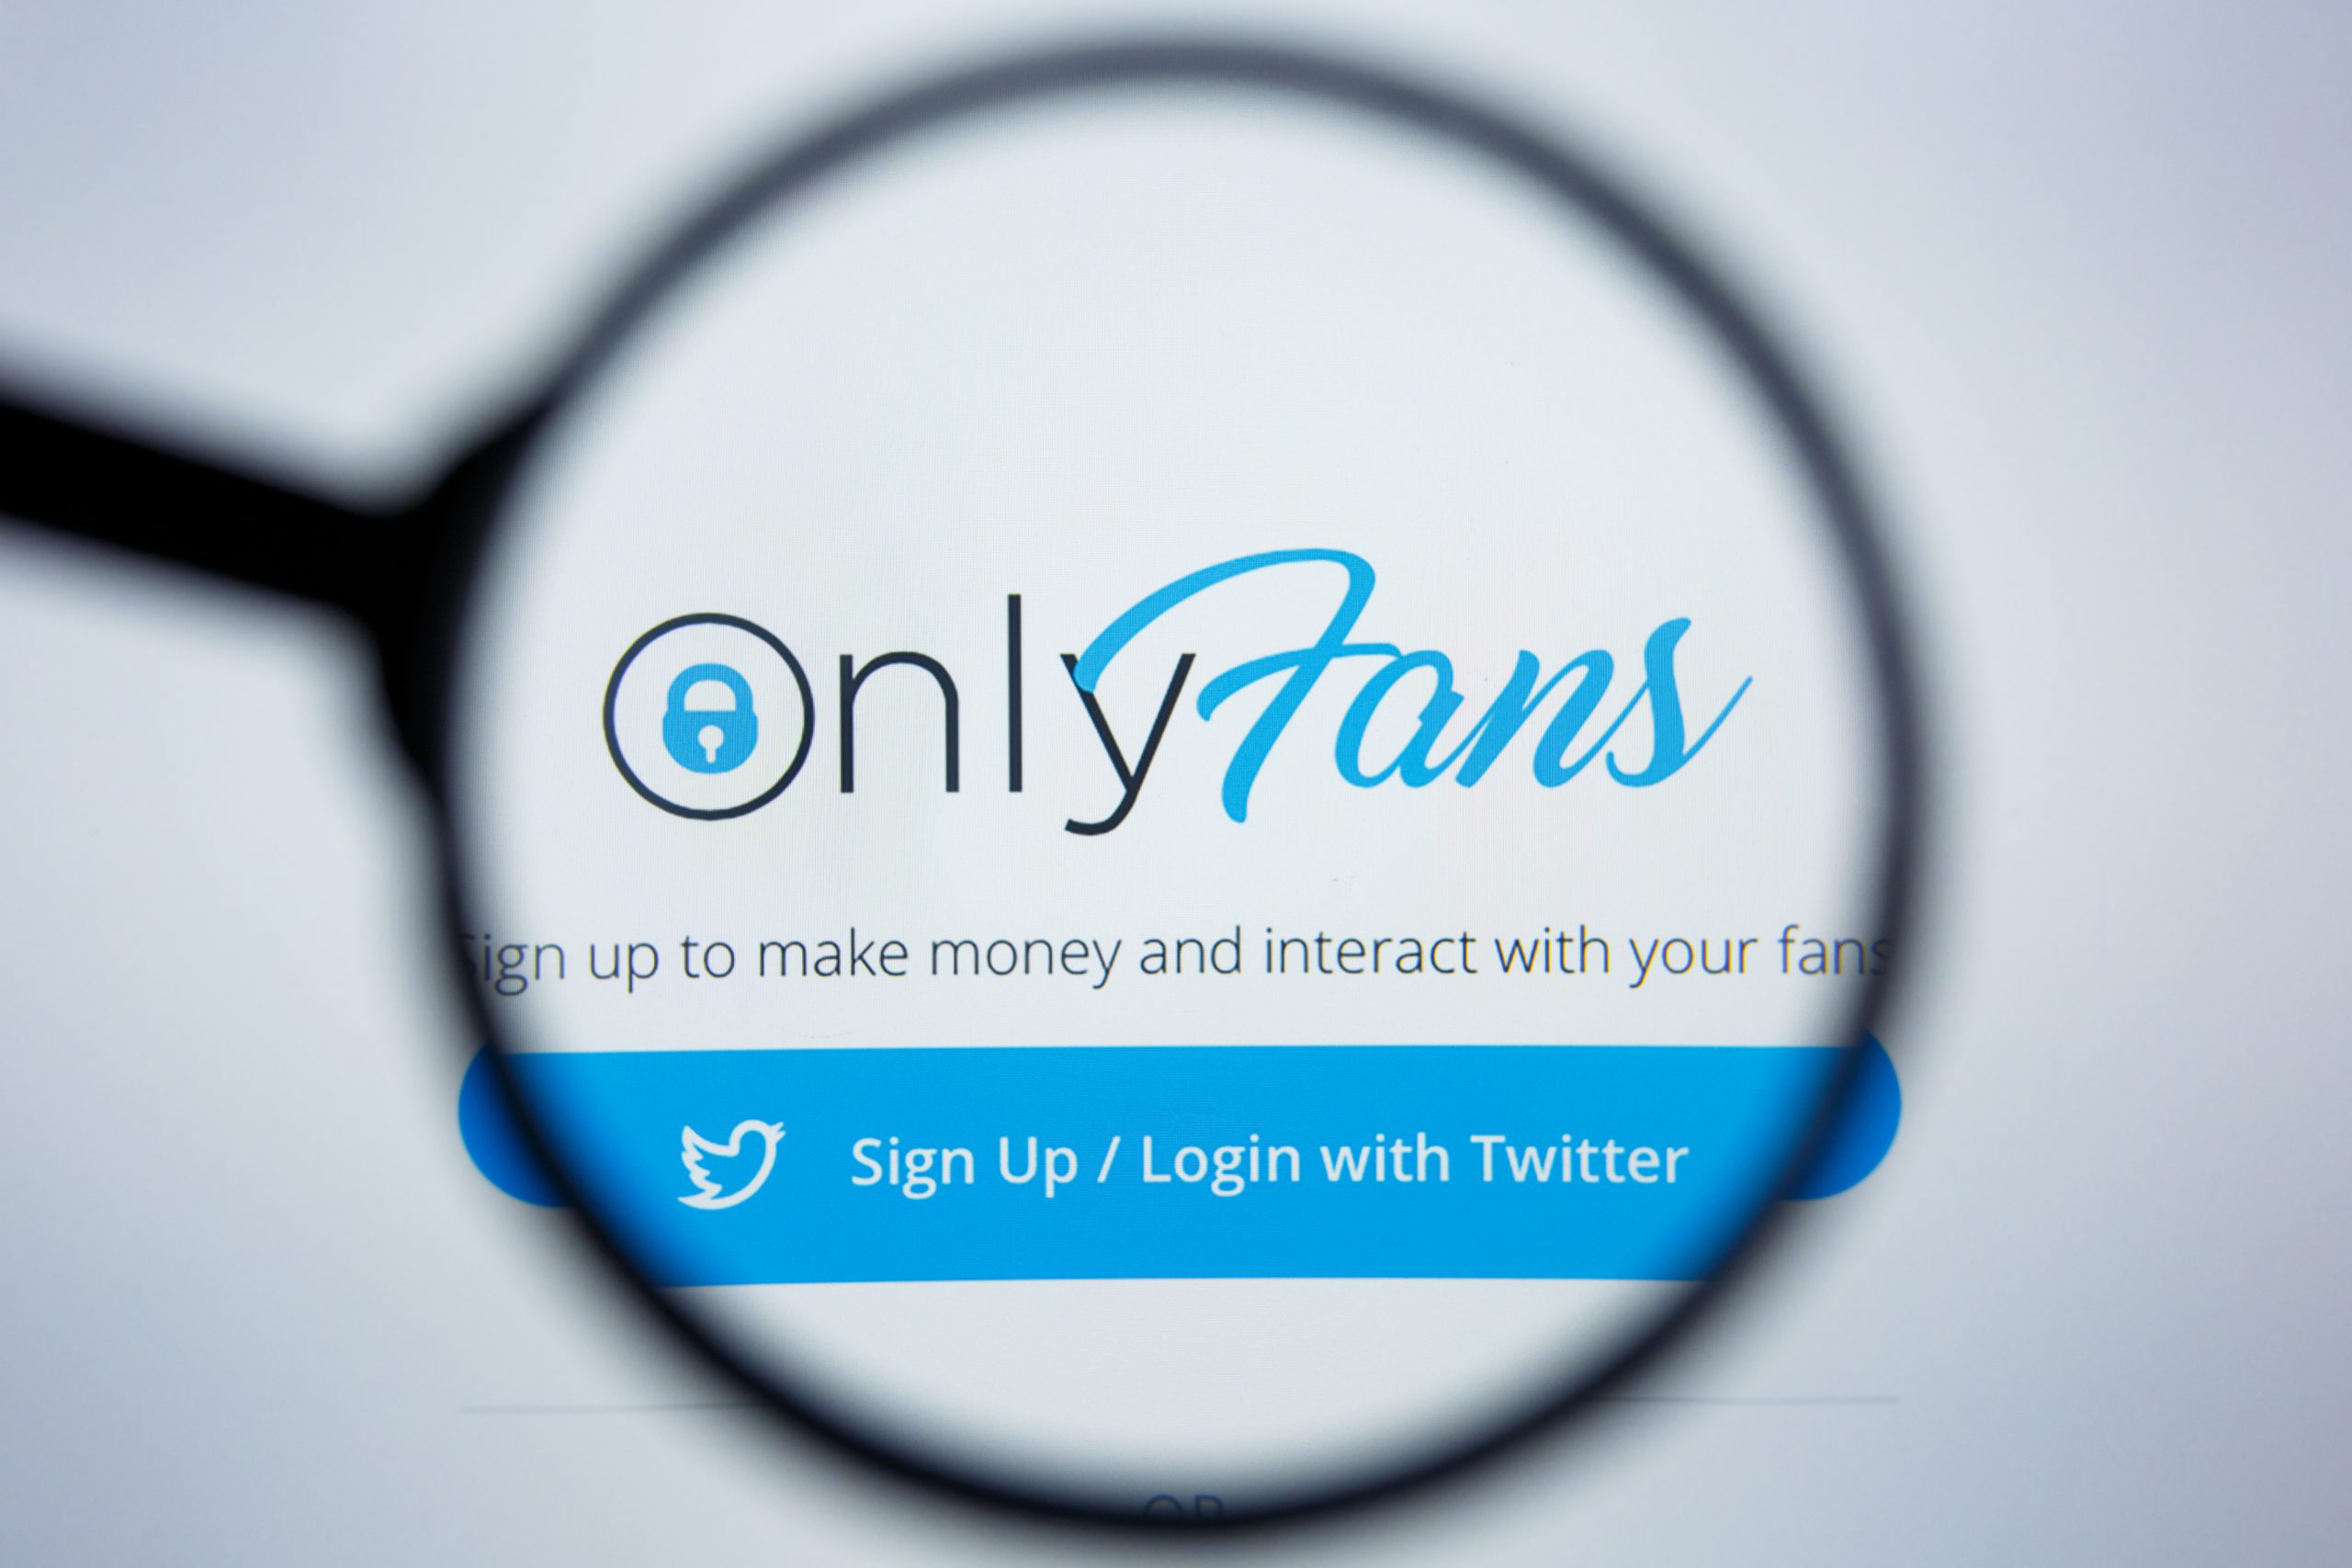 Onlyfans pages